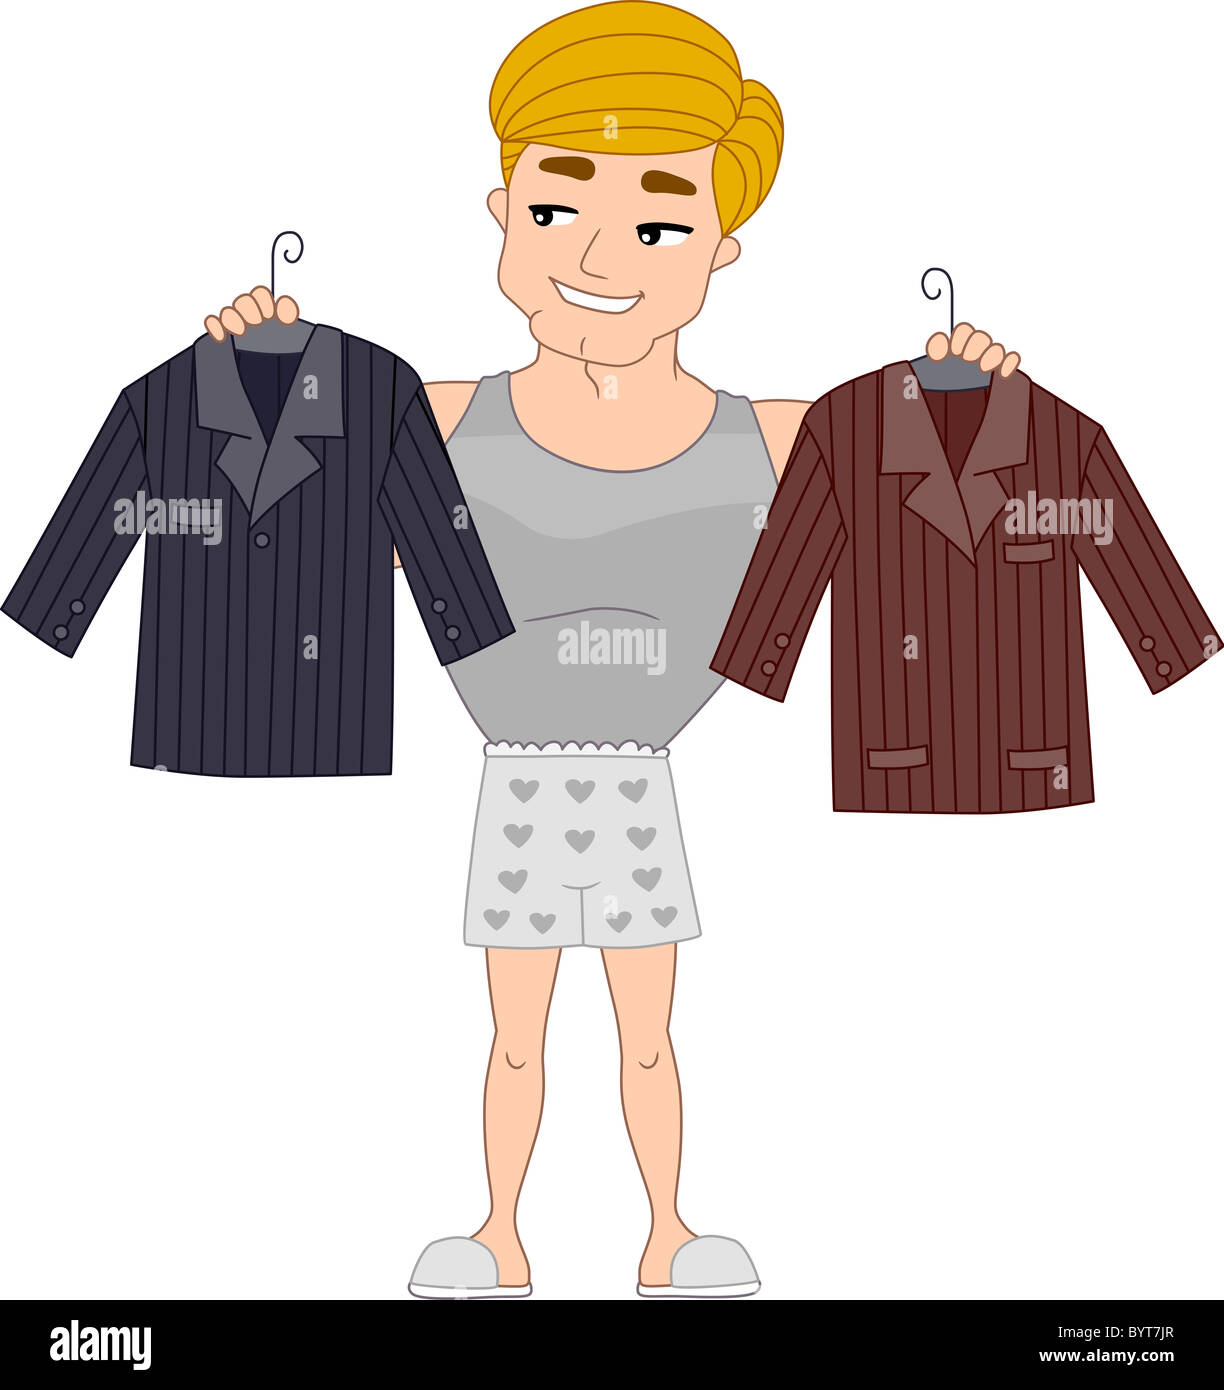 Illustration of a Pinup Guy Choosing Which Coat to Wear Stock Photo